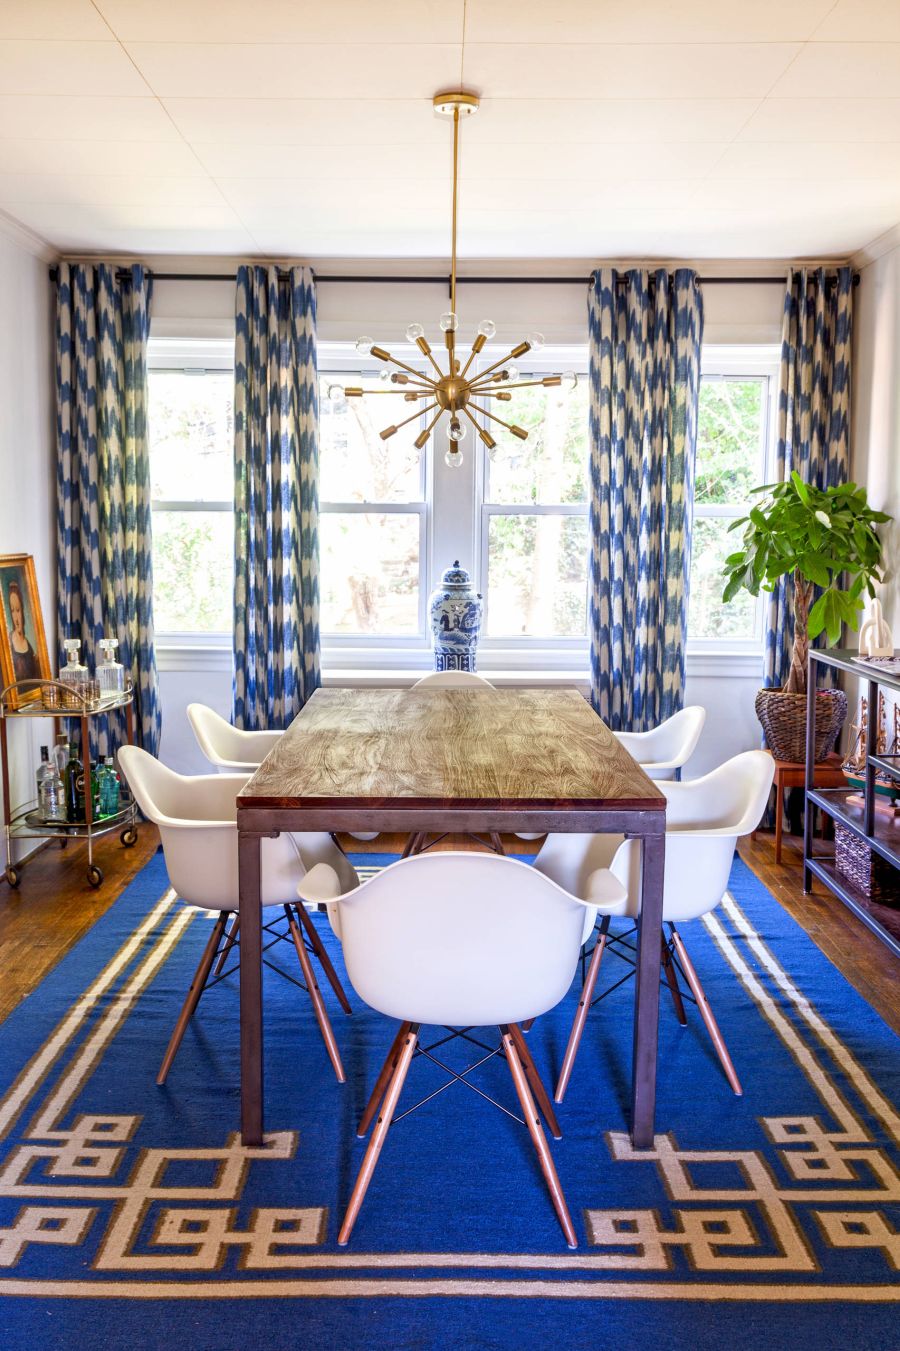 Carpet and drapes add additional pops of blue to the dining room